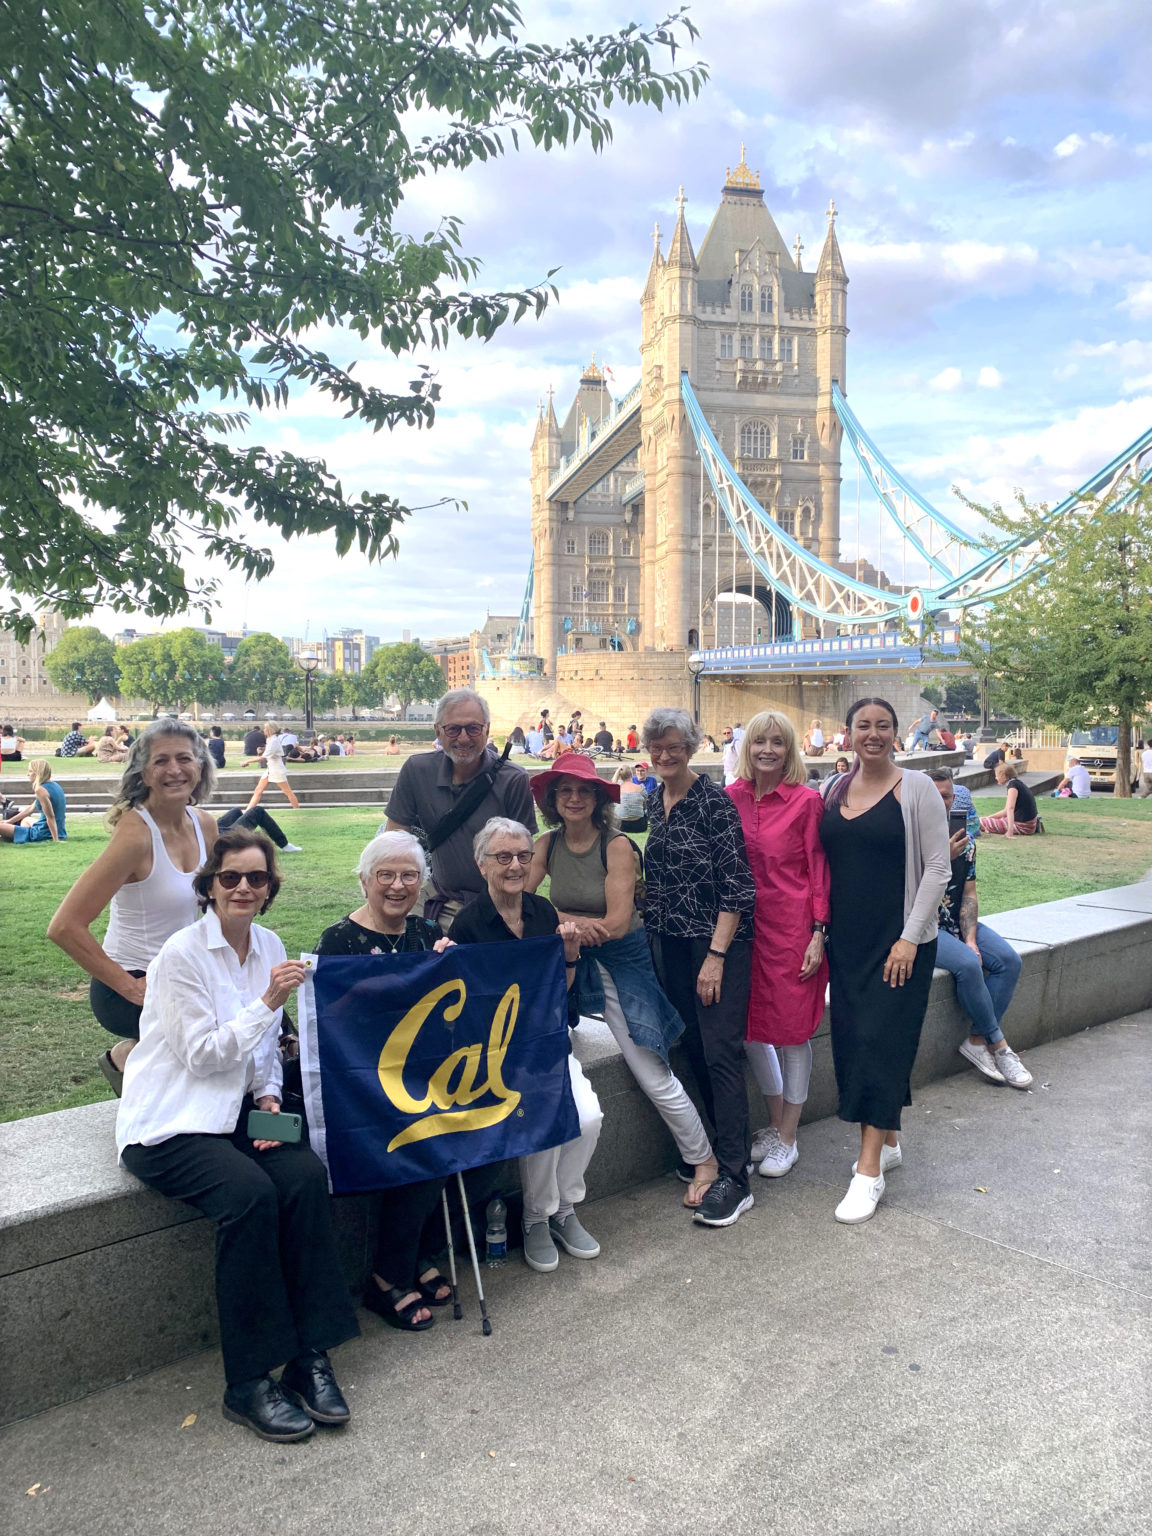 A group of 9 people holding a Cal flag and posing in front of the London bridge.